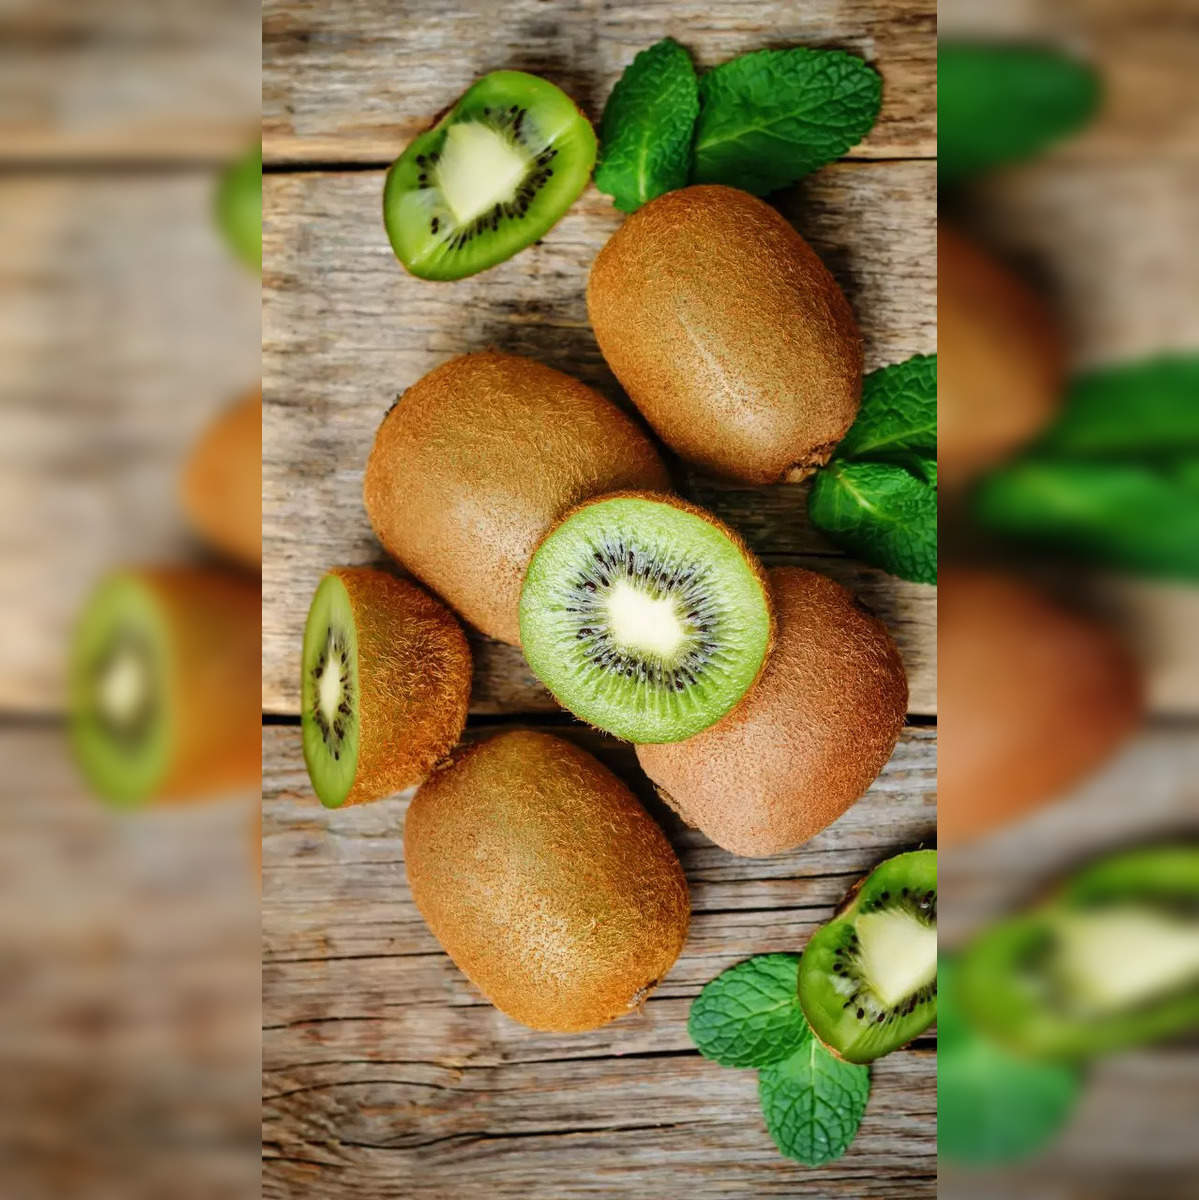 It's Illegal To Grow This Kiwi, So Expensive